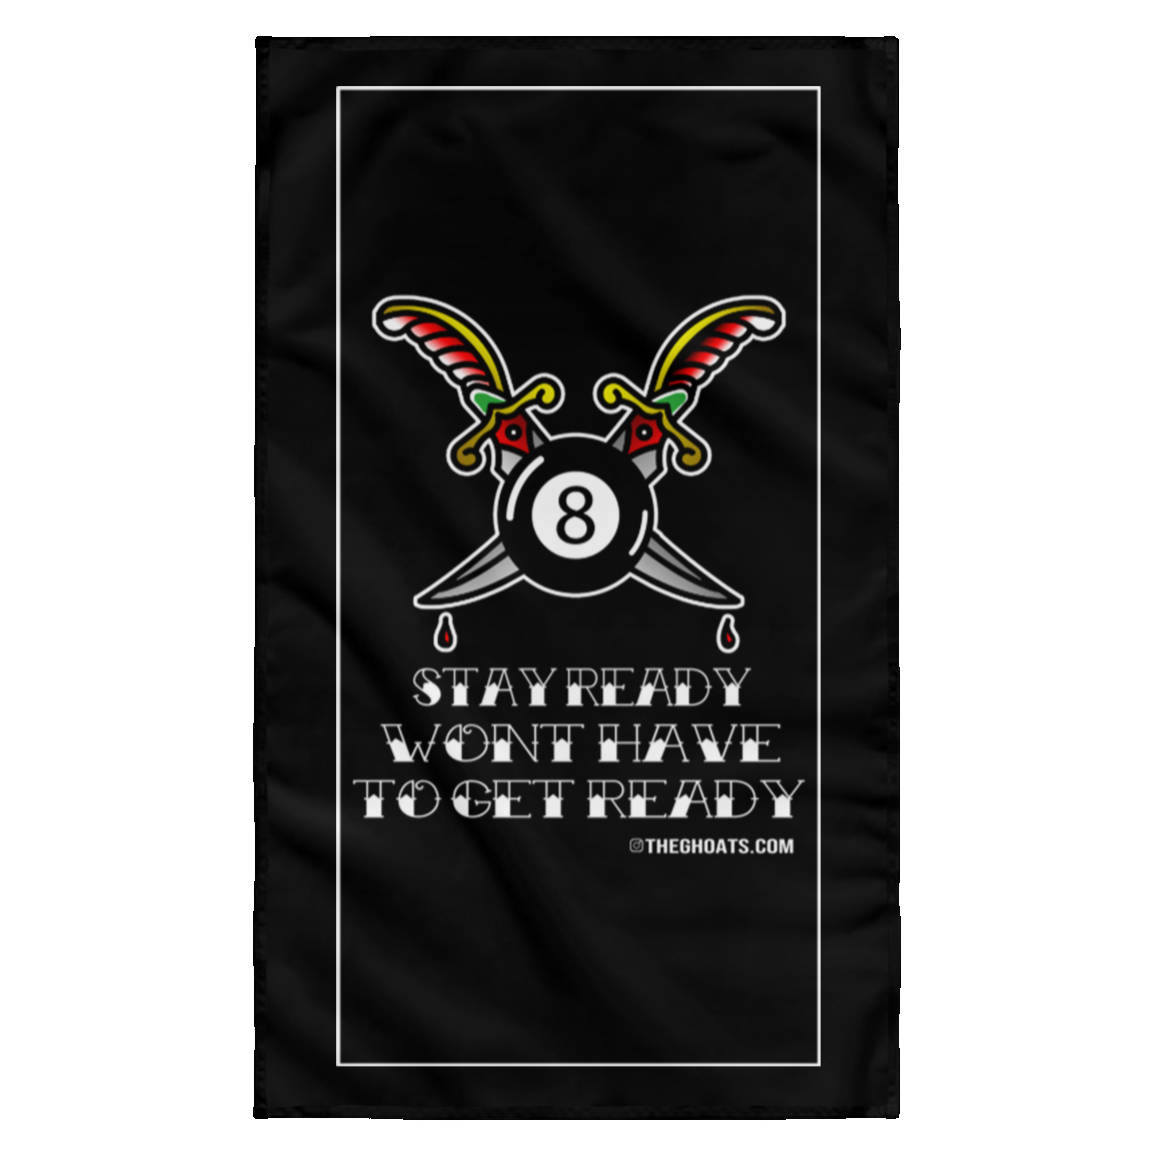 The GHOATS Custom Design #36. Stay Ready Won't Have to Get Ready. Tattoo Style. Ver. 1/2. Wall Flag